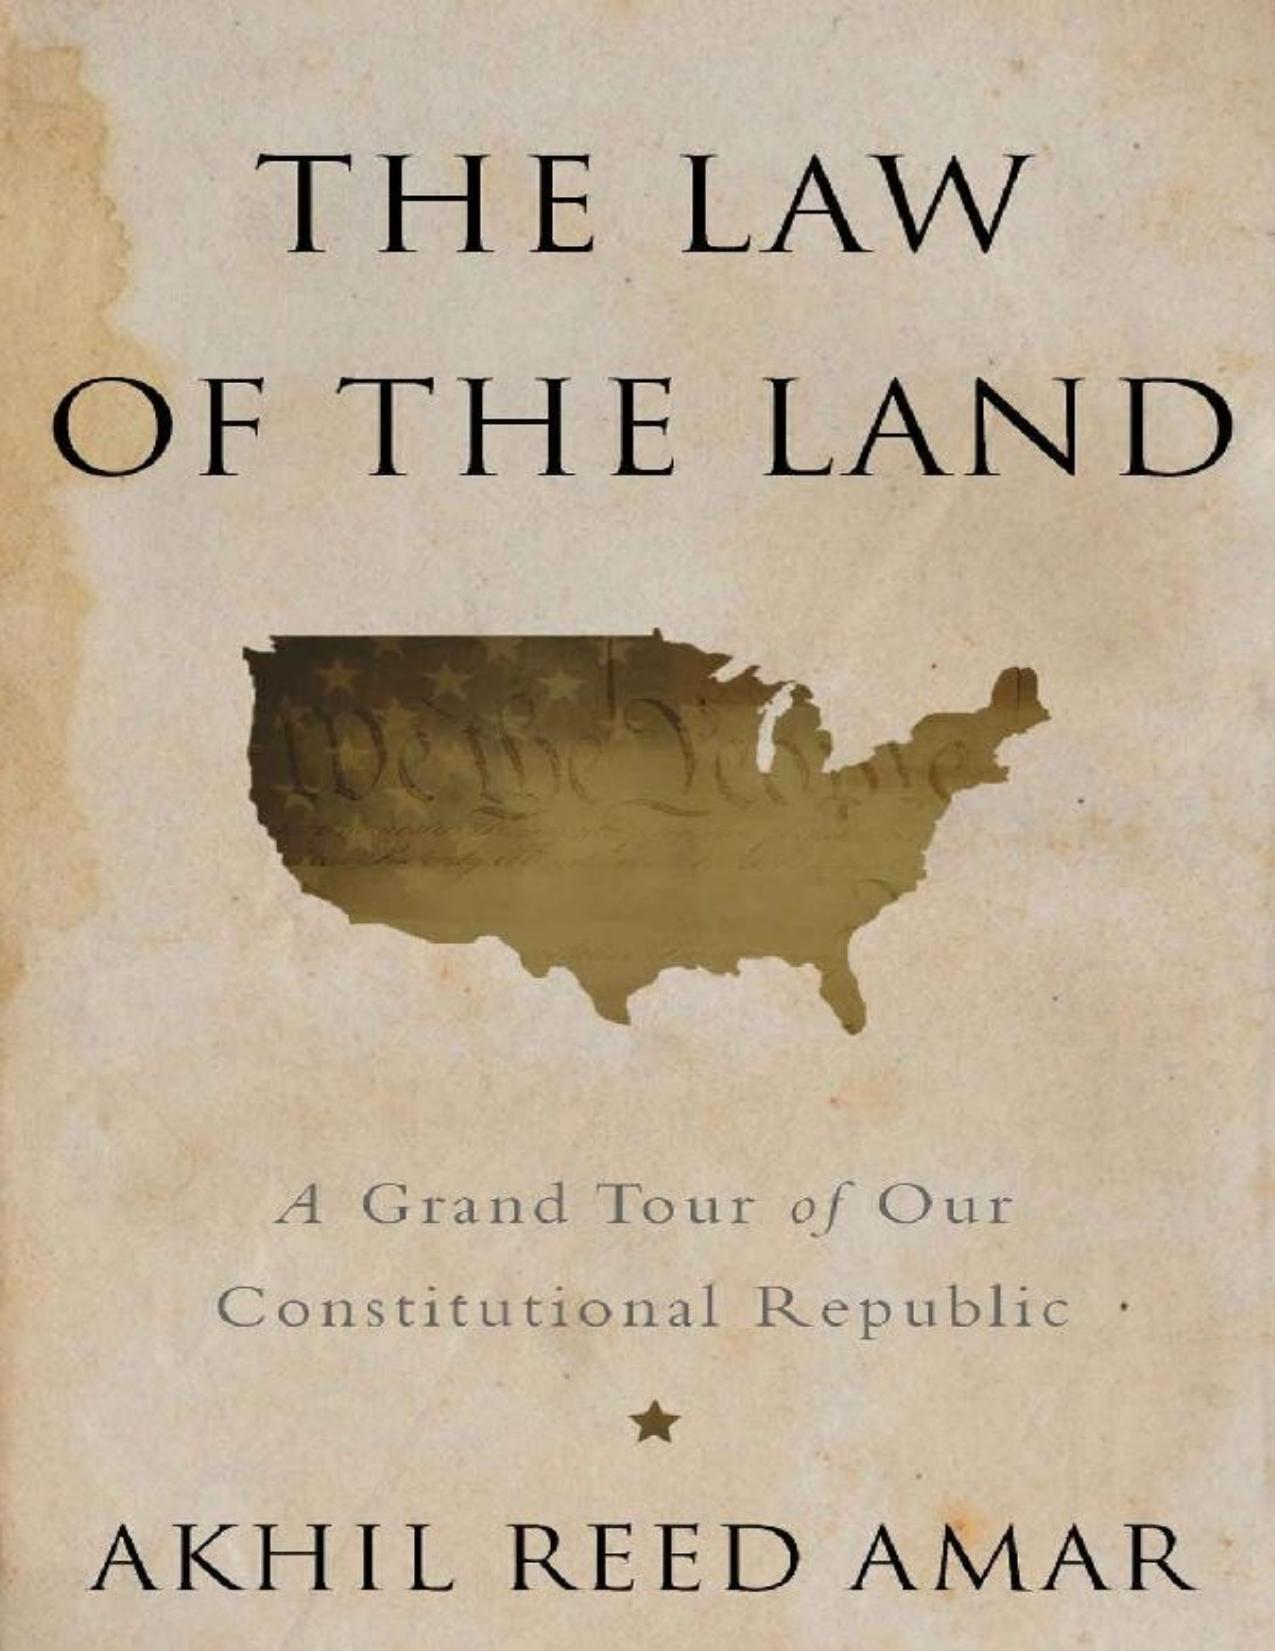 The Law of the Land: A Grand Tour of Our Constitutional Republic - PDFDrive.com